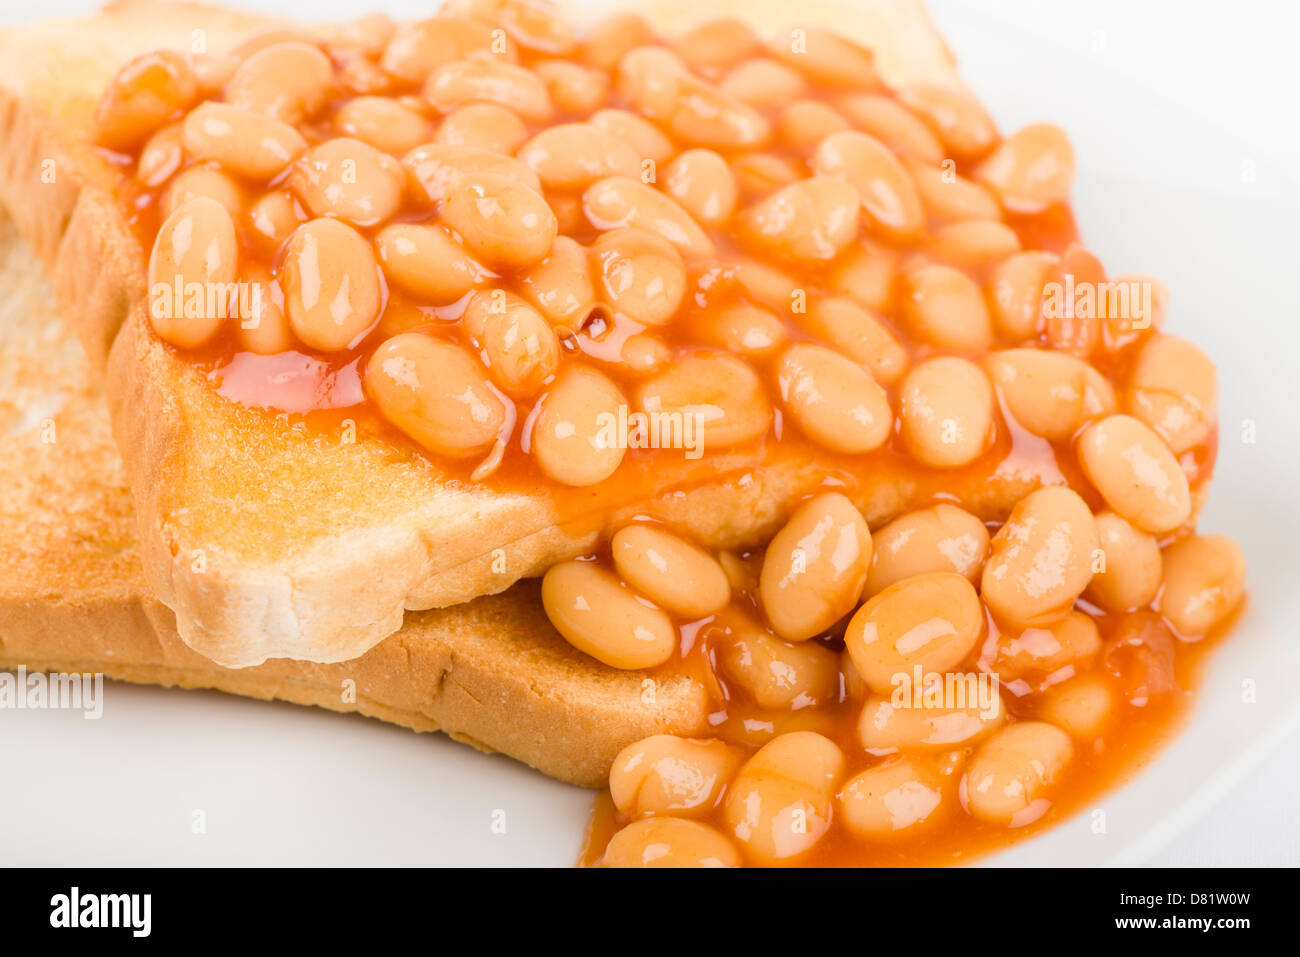 Beans on Toast - Slices of toasted white bread, buttered and topped with baked beans. Simple British breakfast meal. Stock Photo